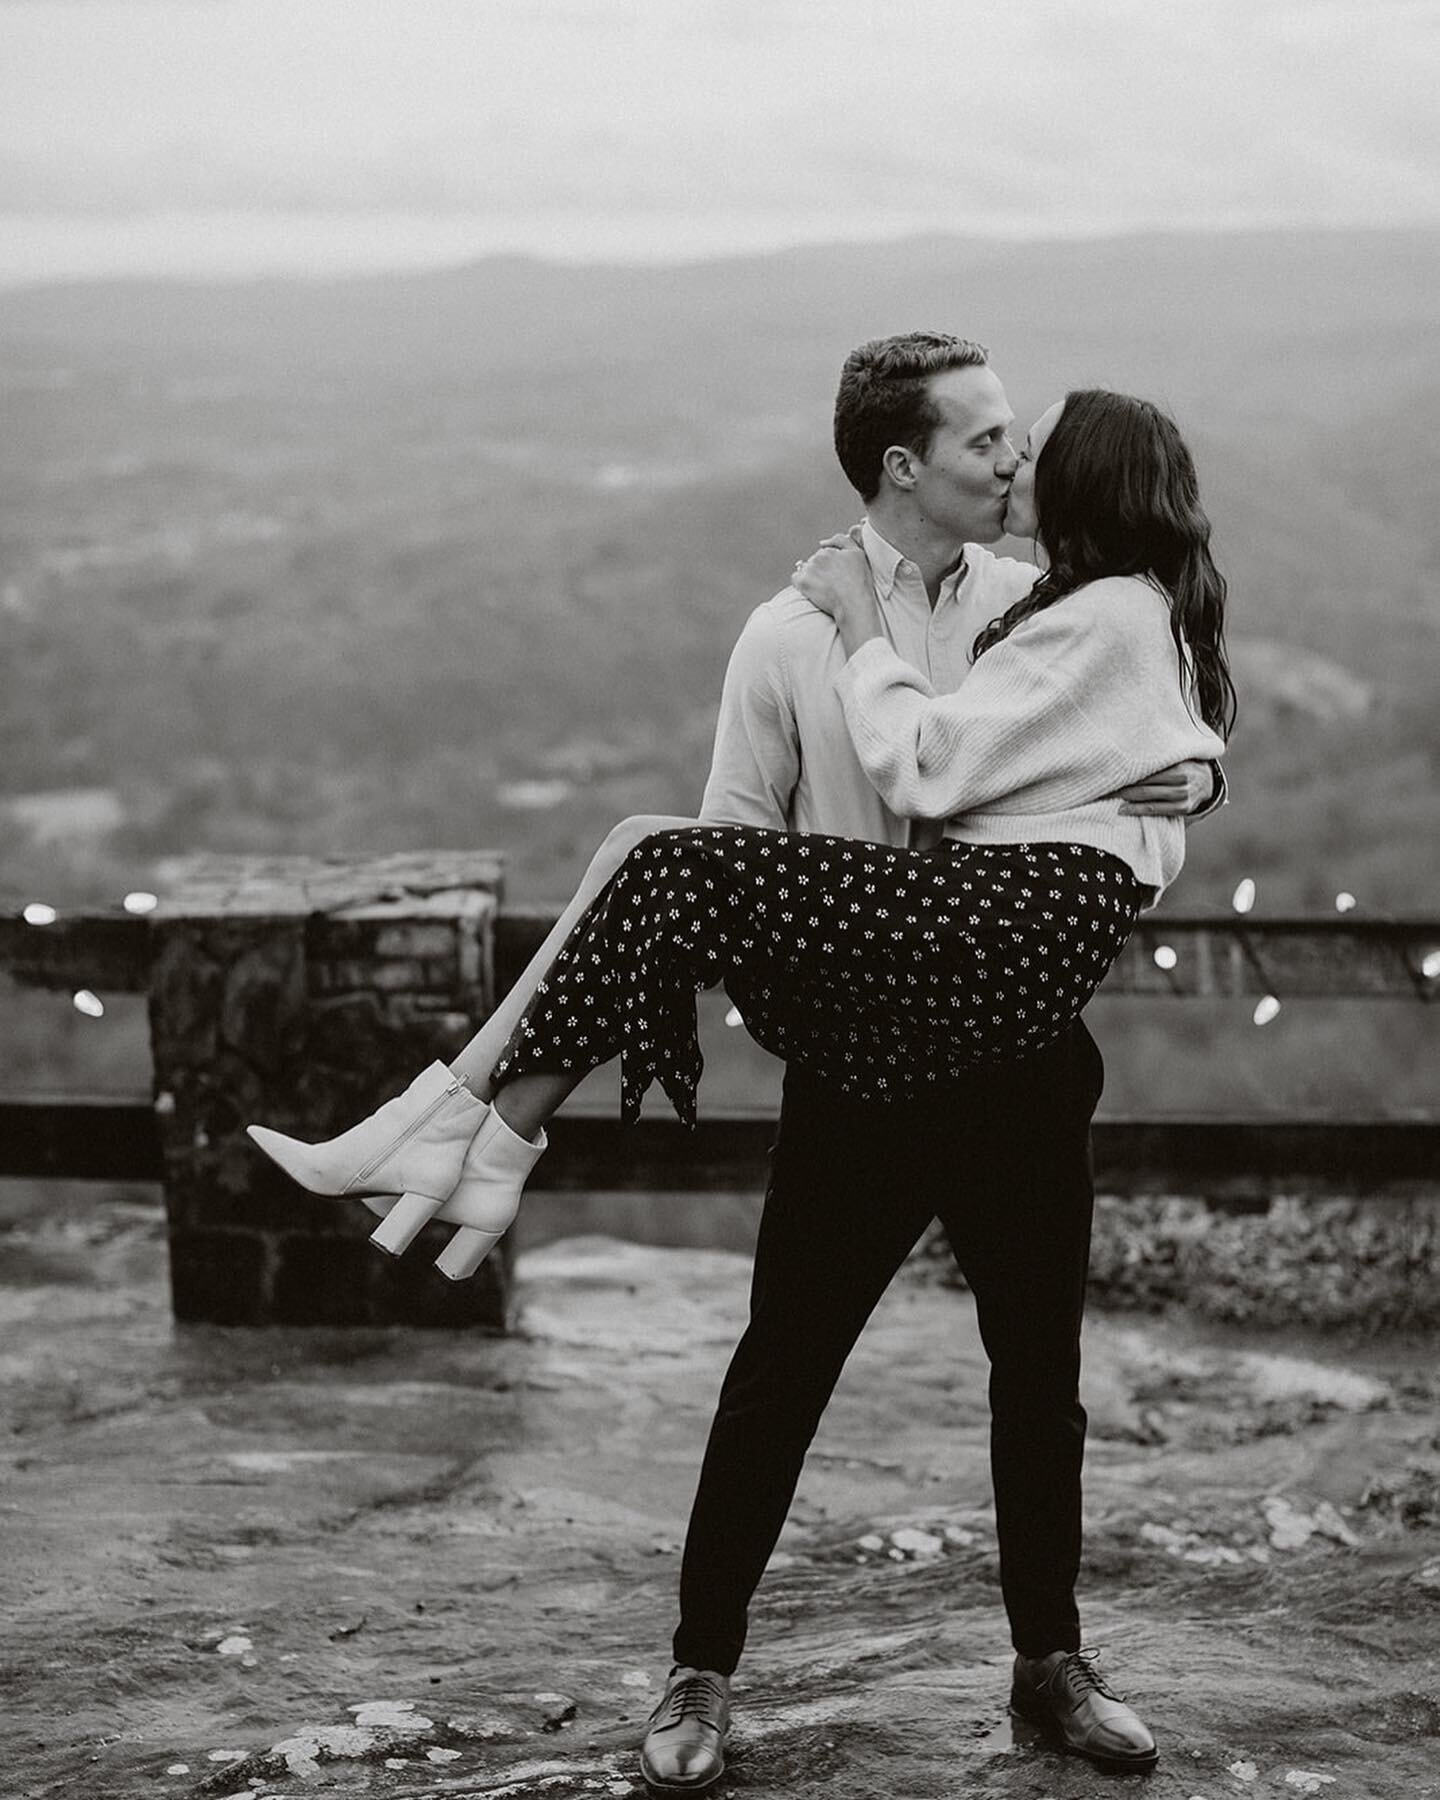 If you want to have your engagement shoot on top of a mountain please think of me. 😇